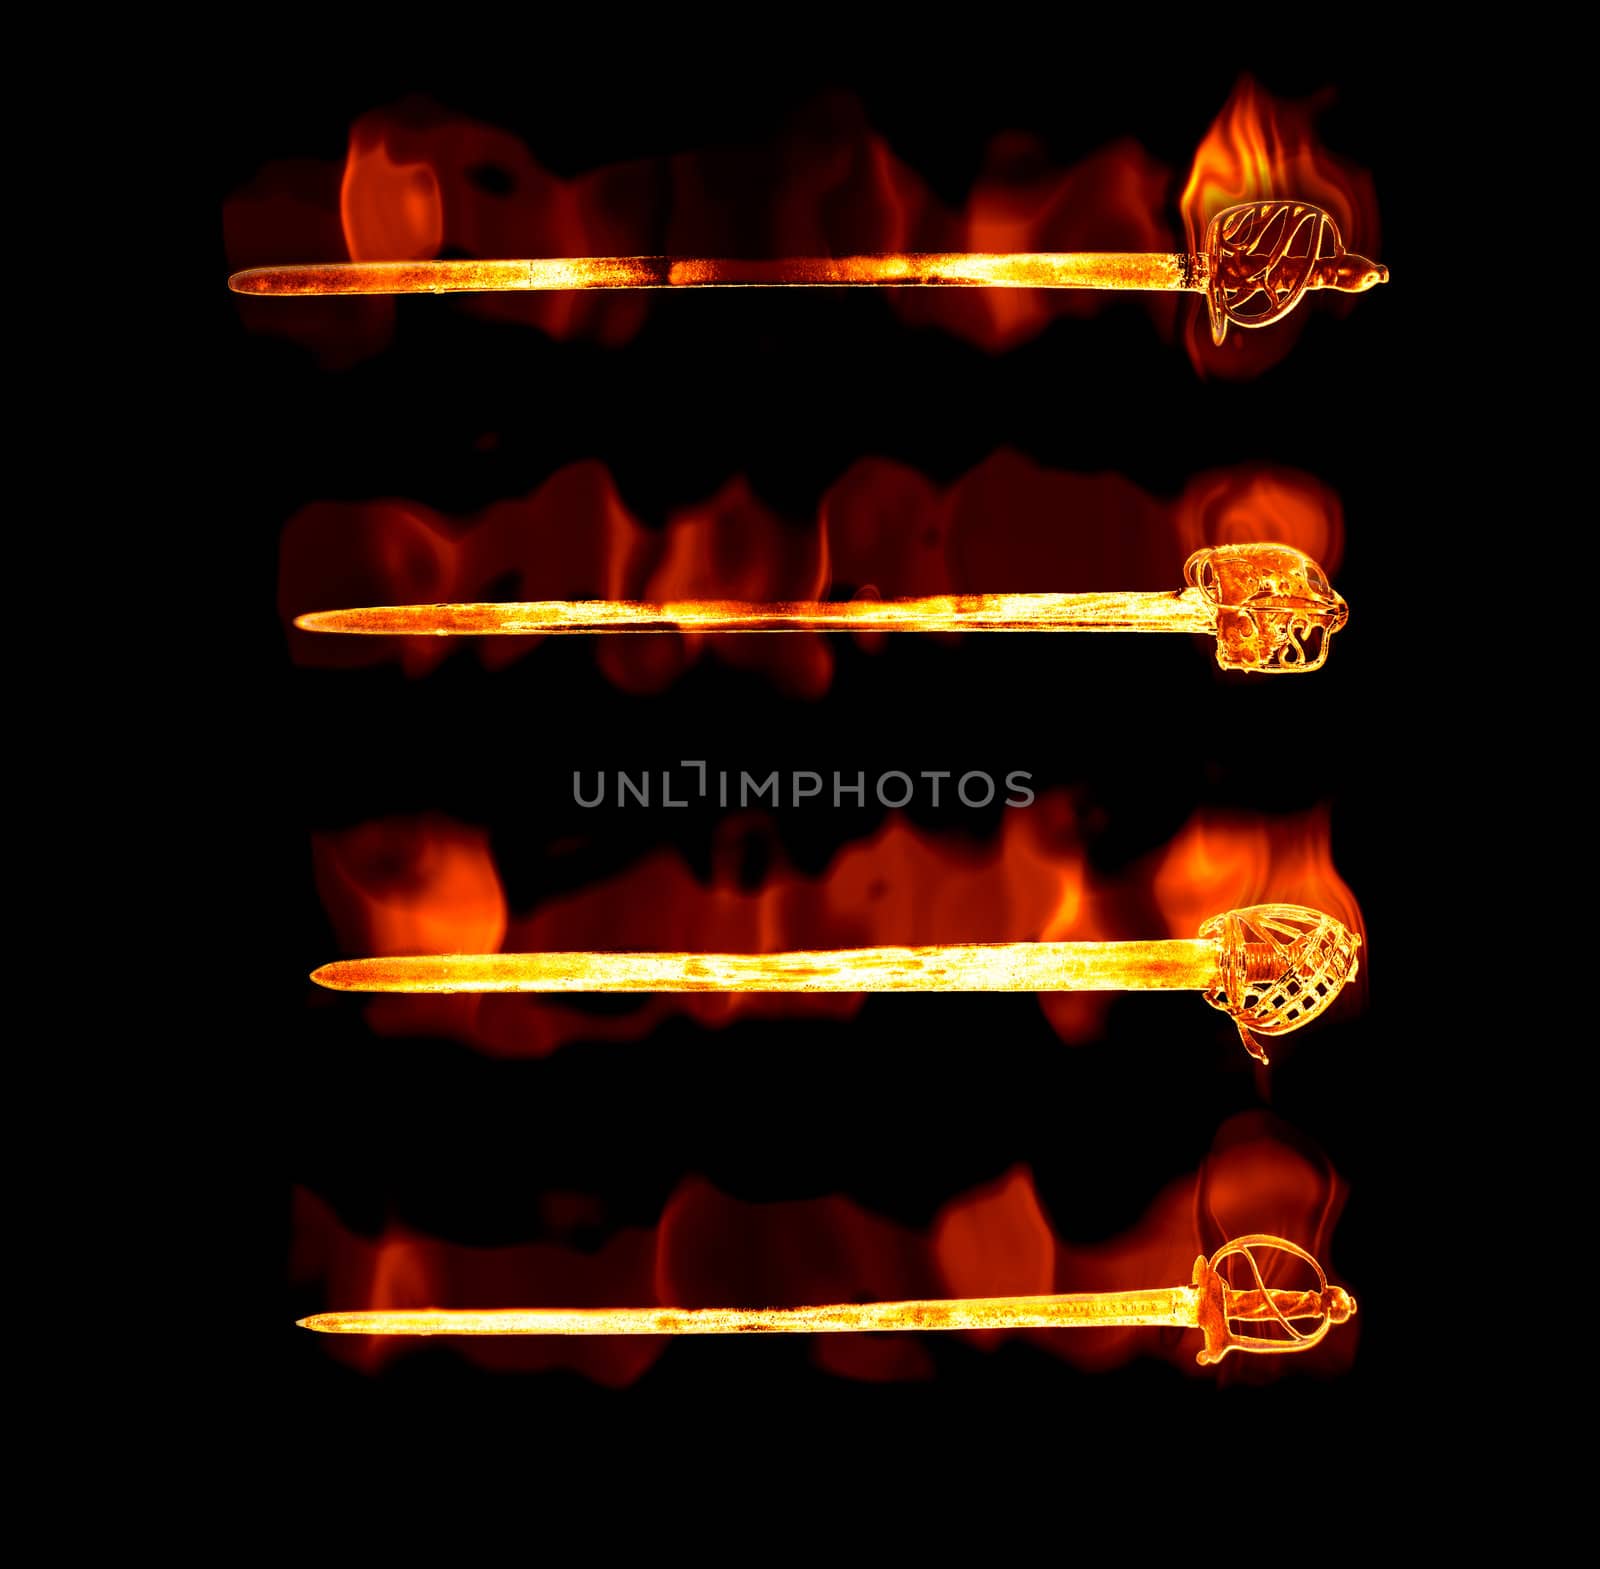 great image of four fiery or flaming swords